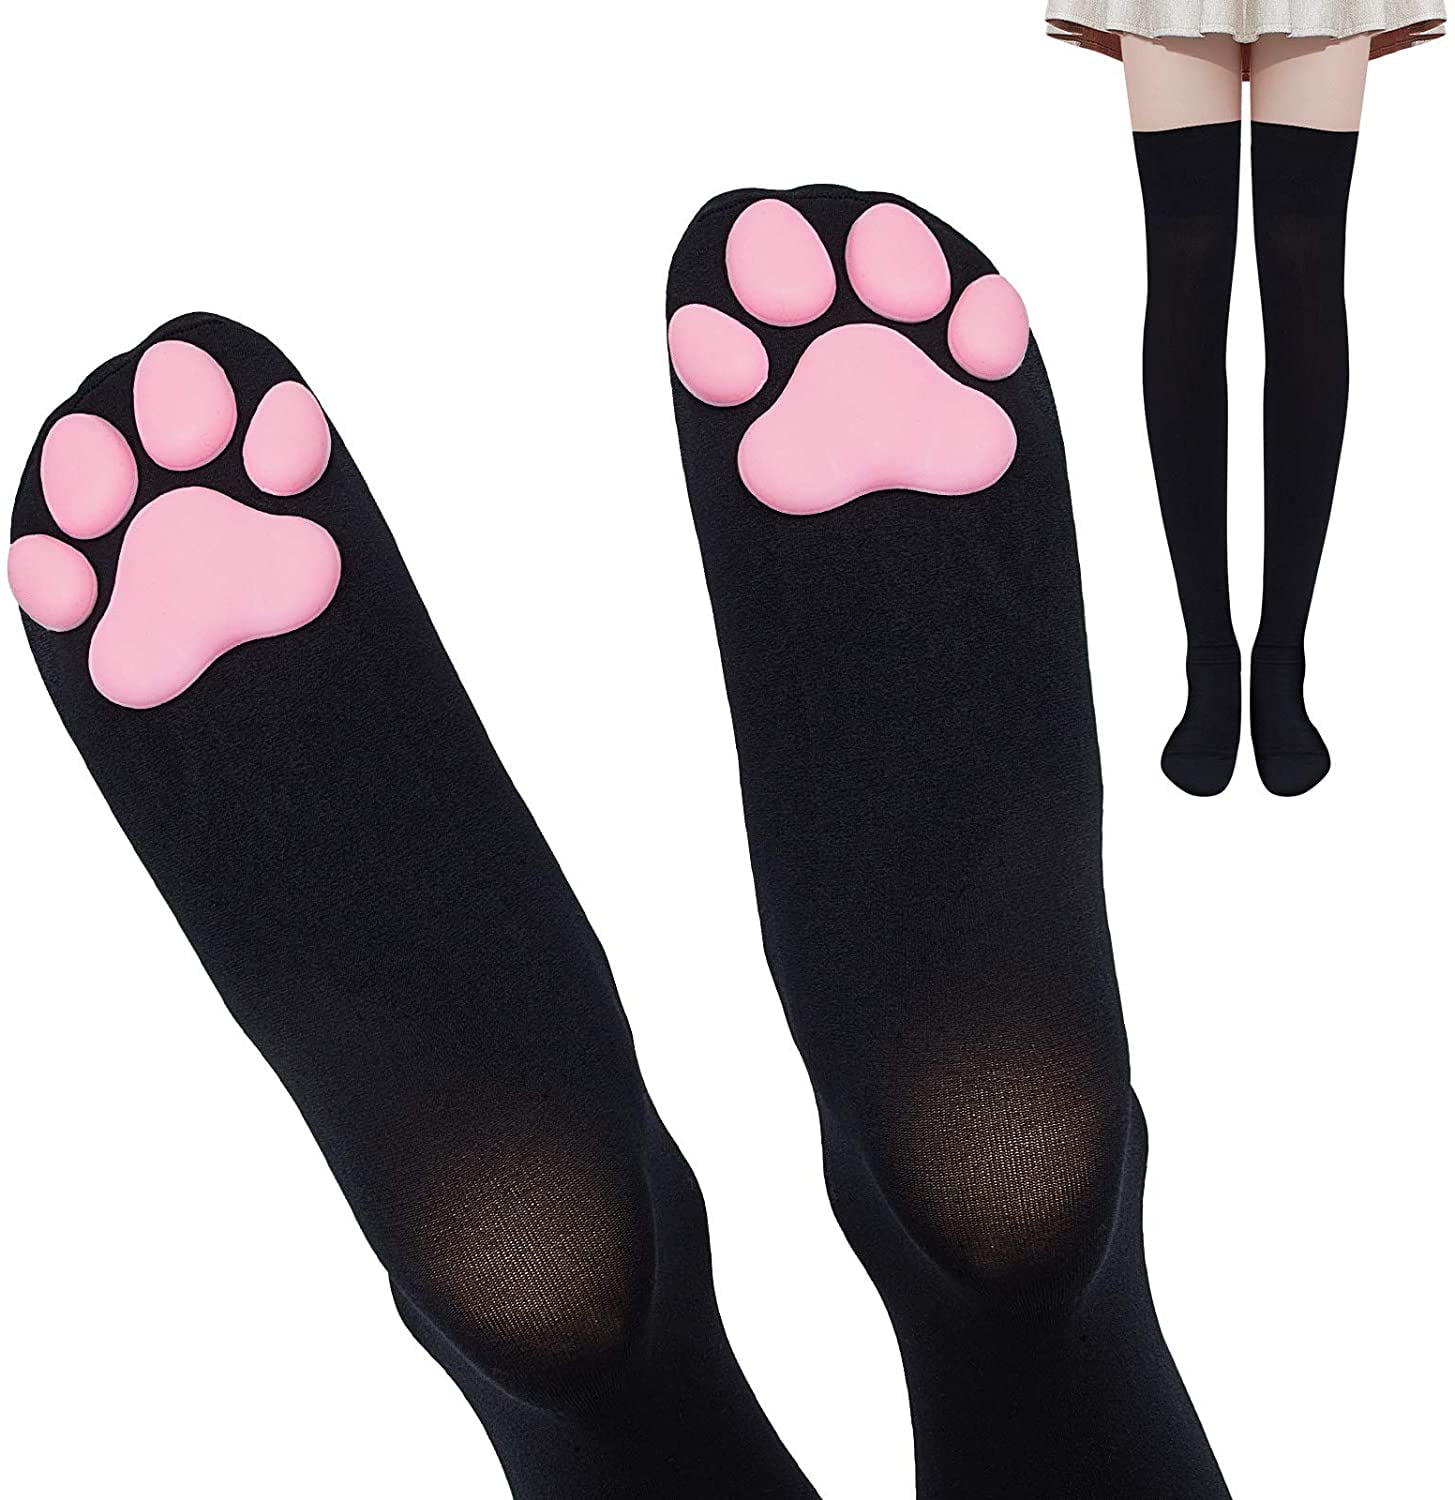 Cat Paw Pad Socks Thigh High Pink Cute 3d Kitten Claw Stockings For